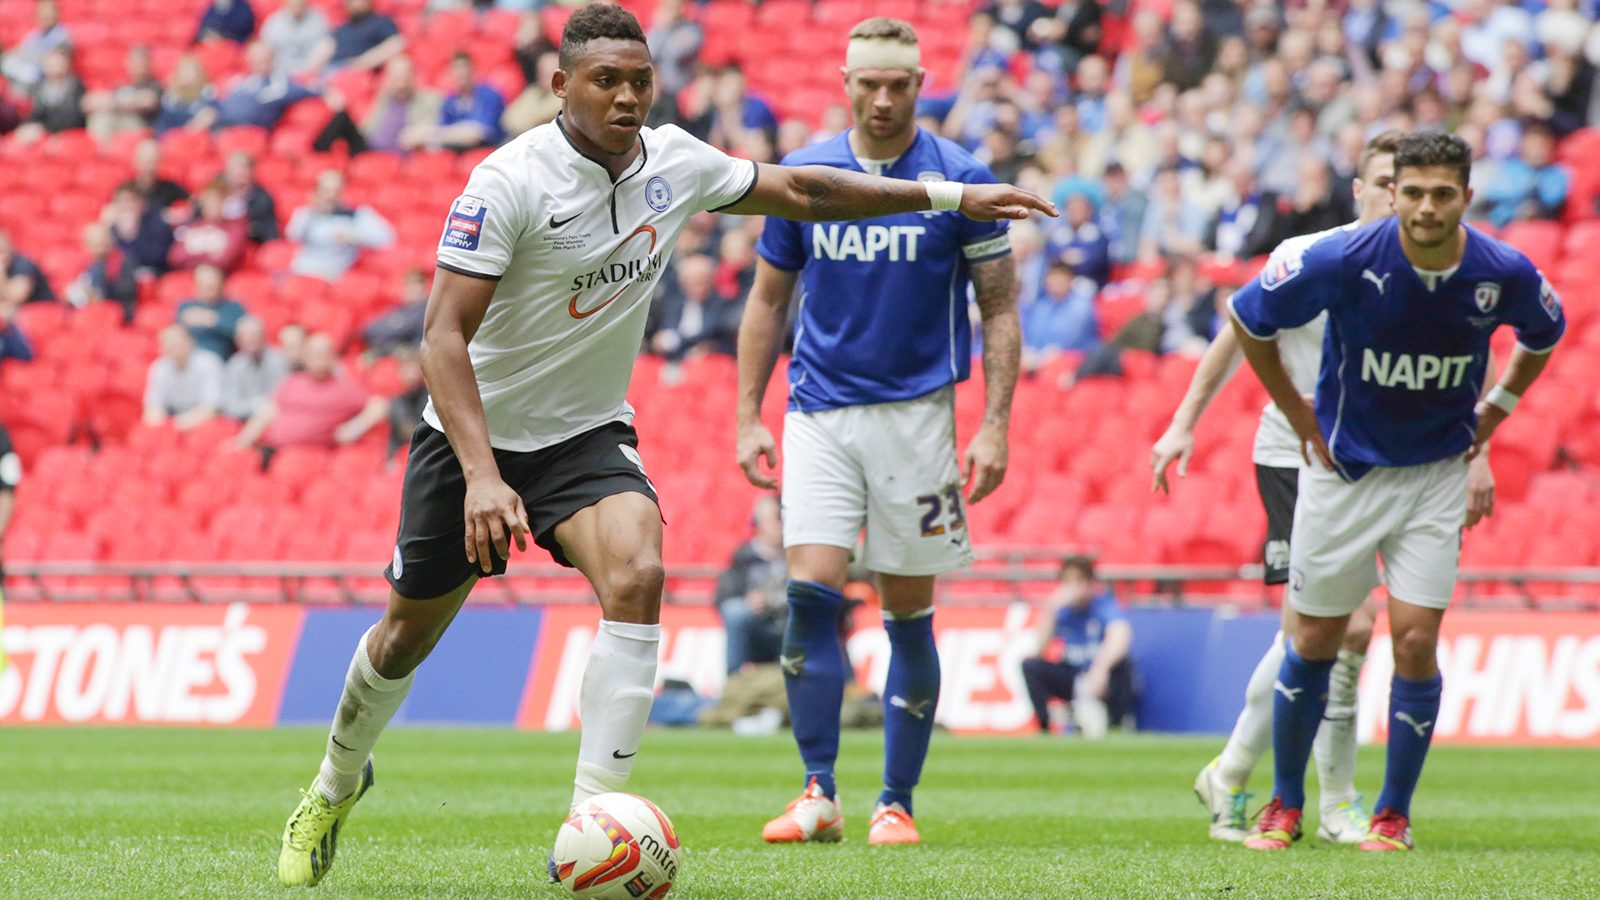 Britt Assombalonga scores from the penalty spot at Wembley